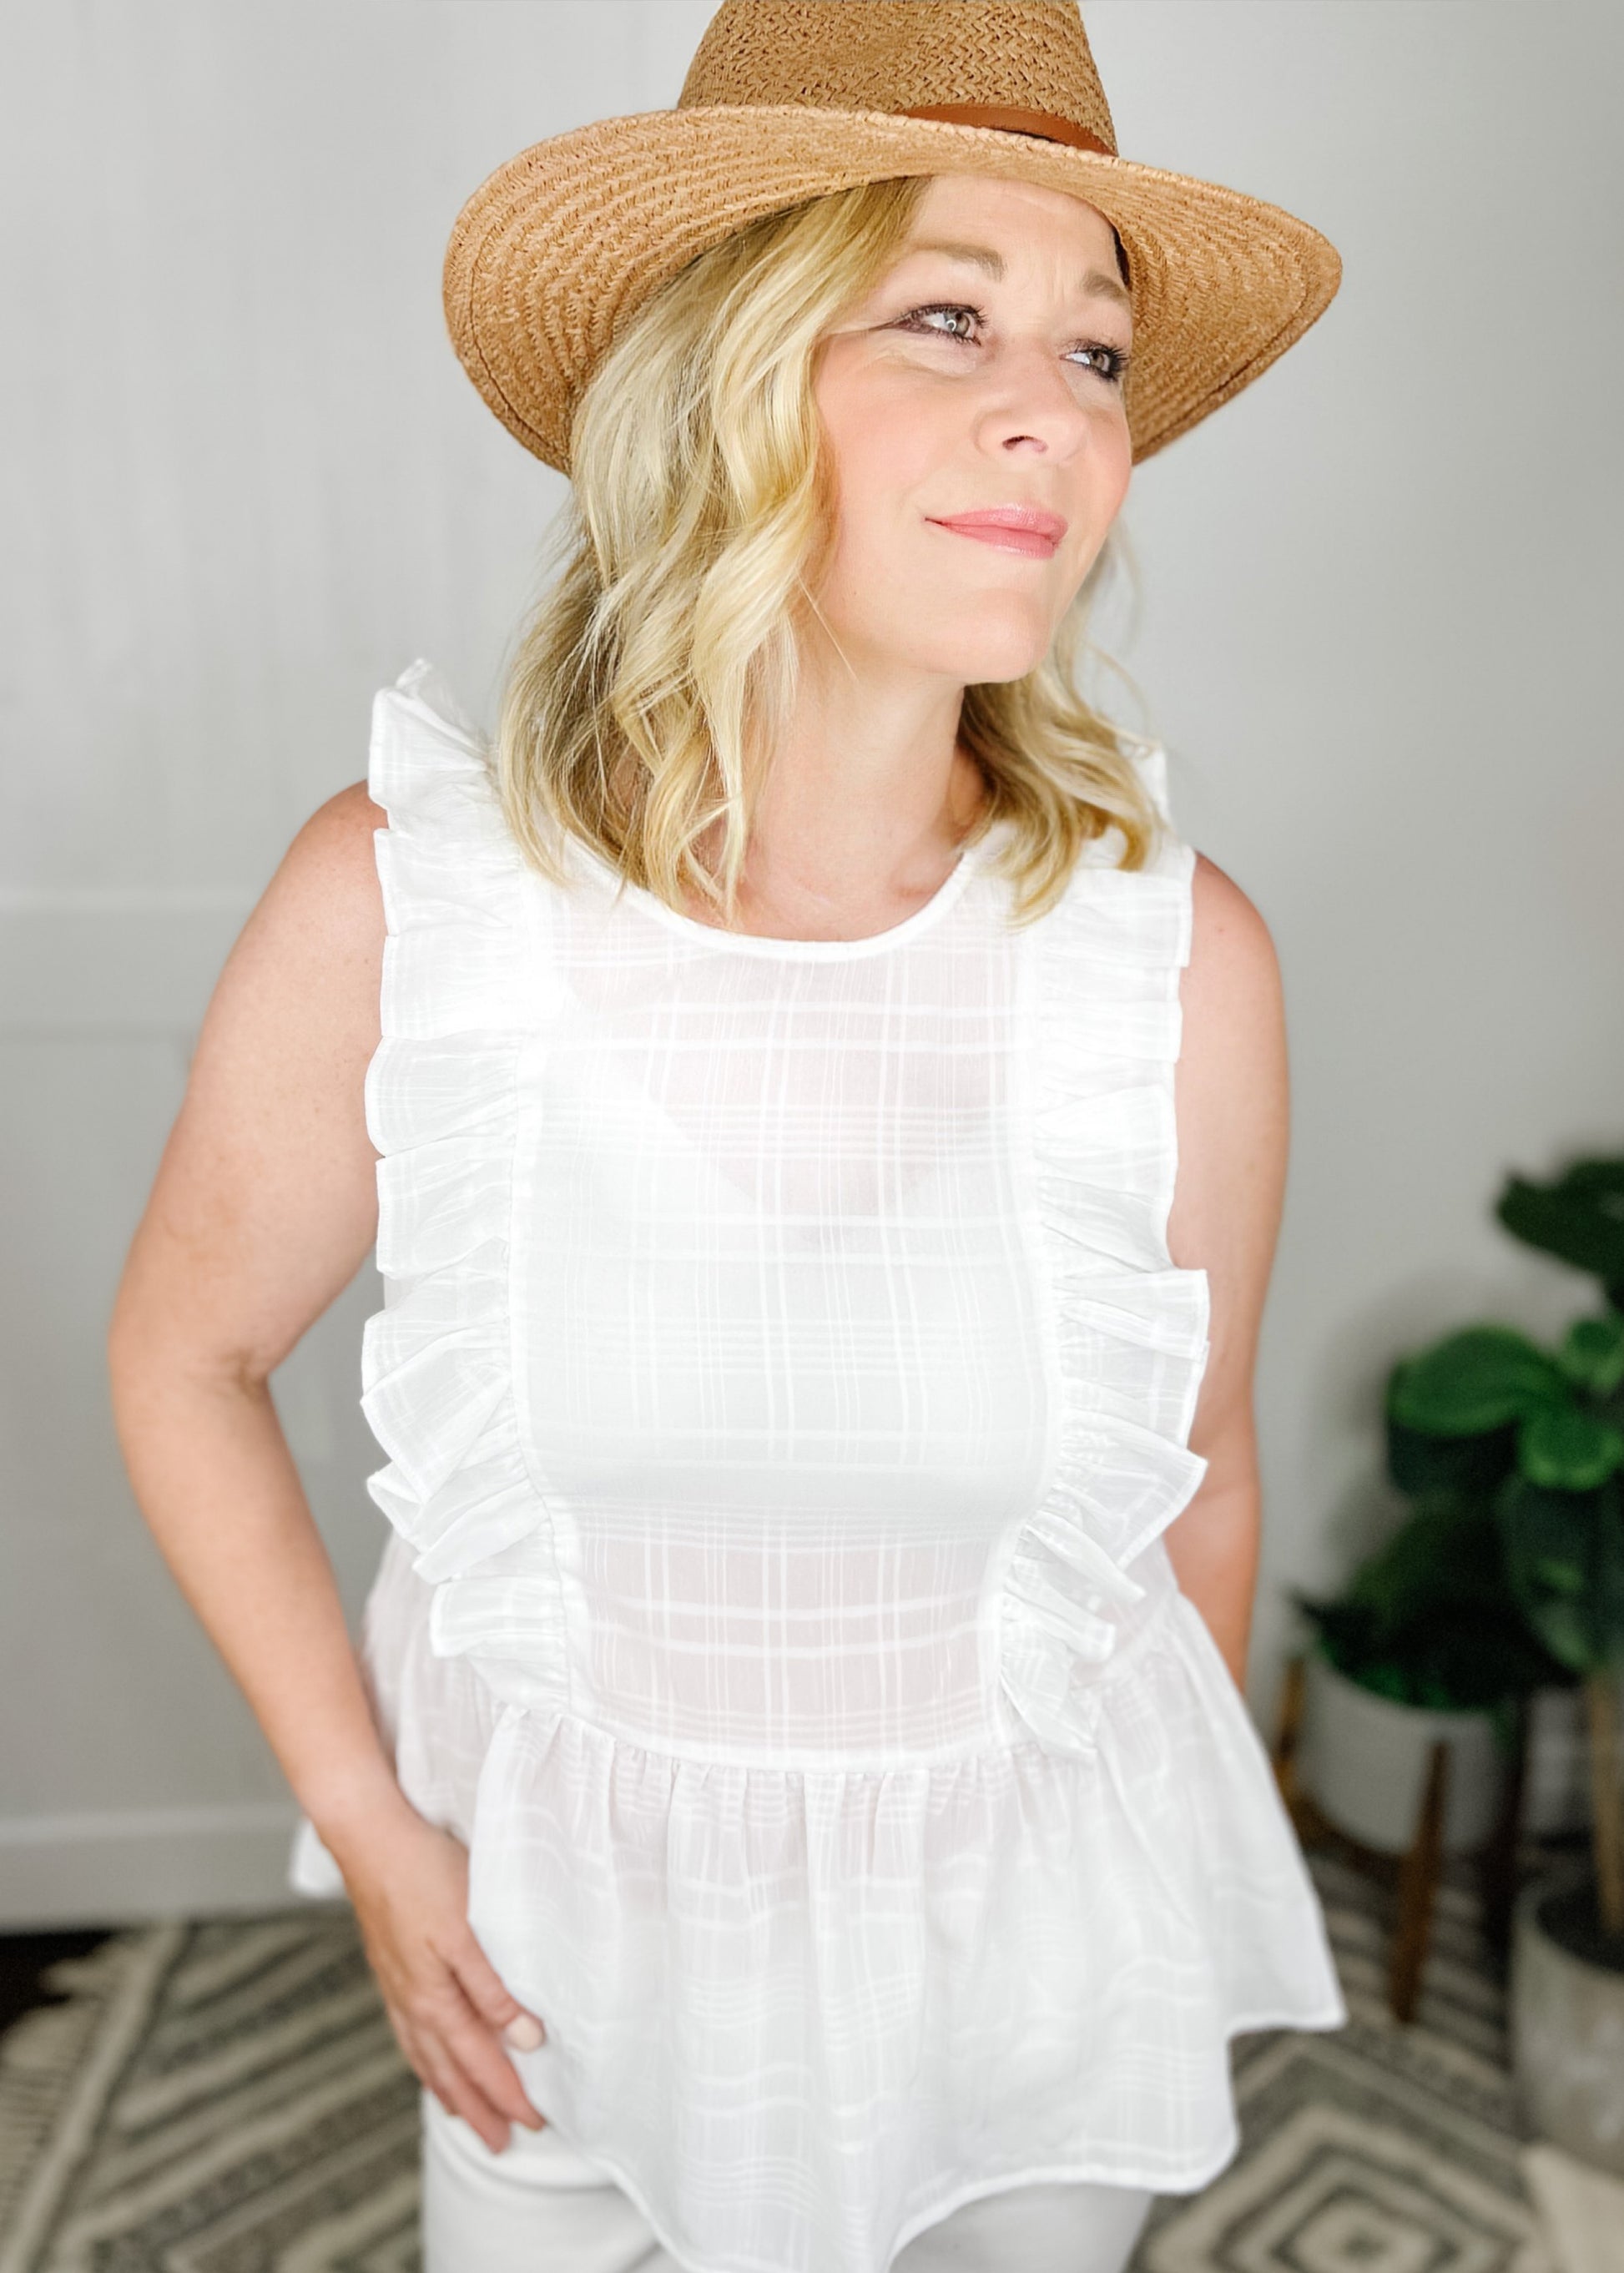 White sleeveless peplum with inset plaid pattern. Vertical ruffles from shoulder to waist. 